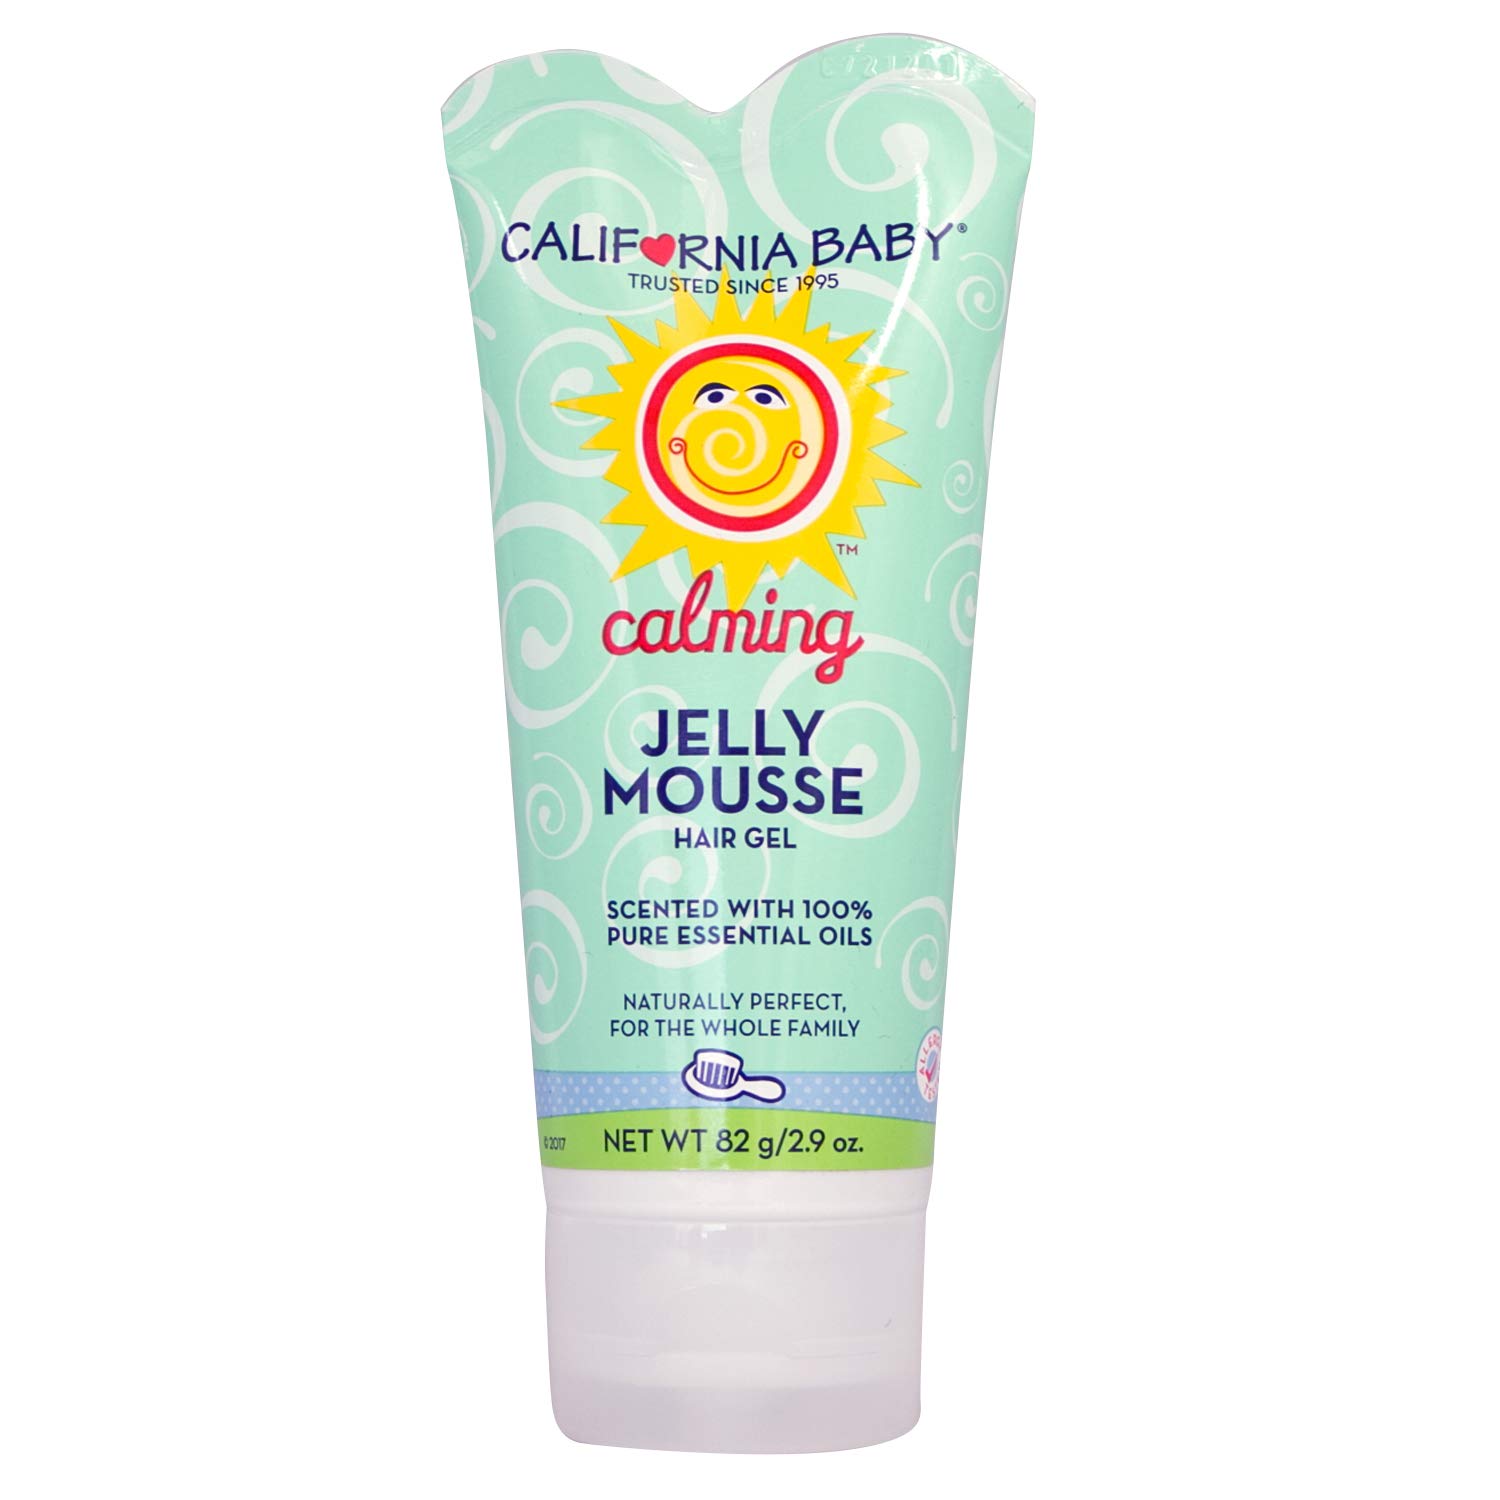 California Baby Jelly Mousse - Calming - 2.9 oz